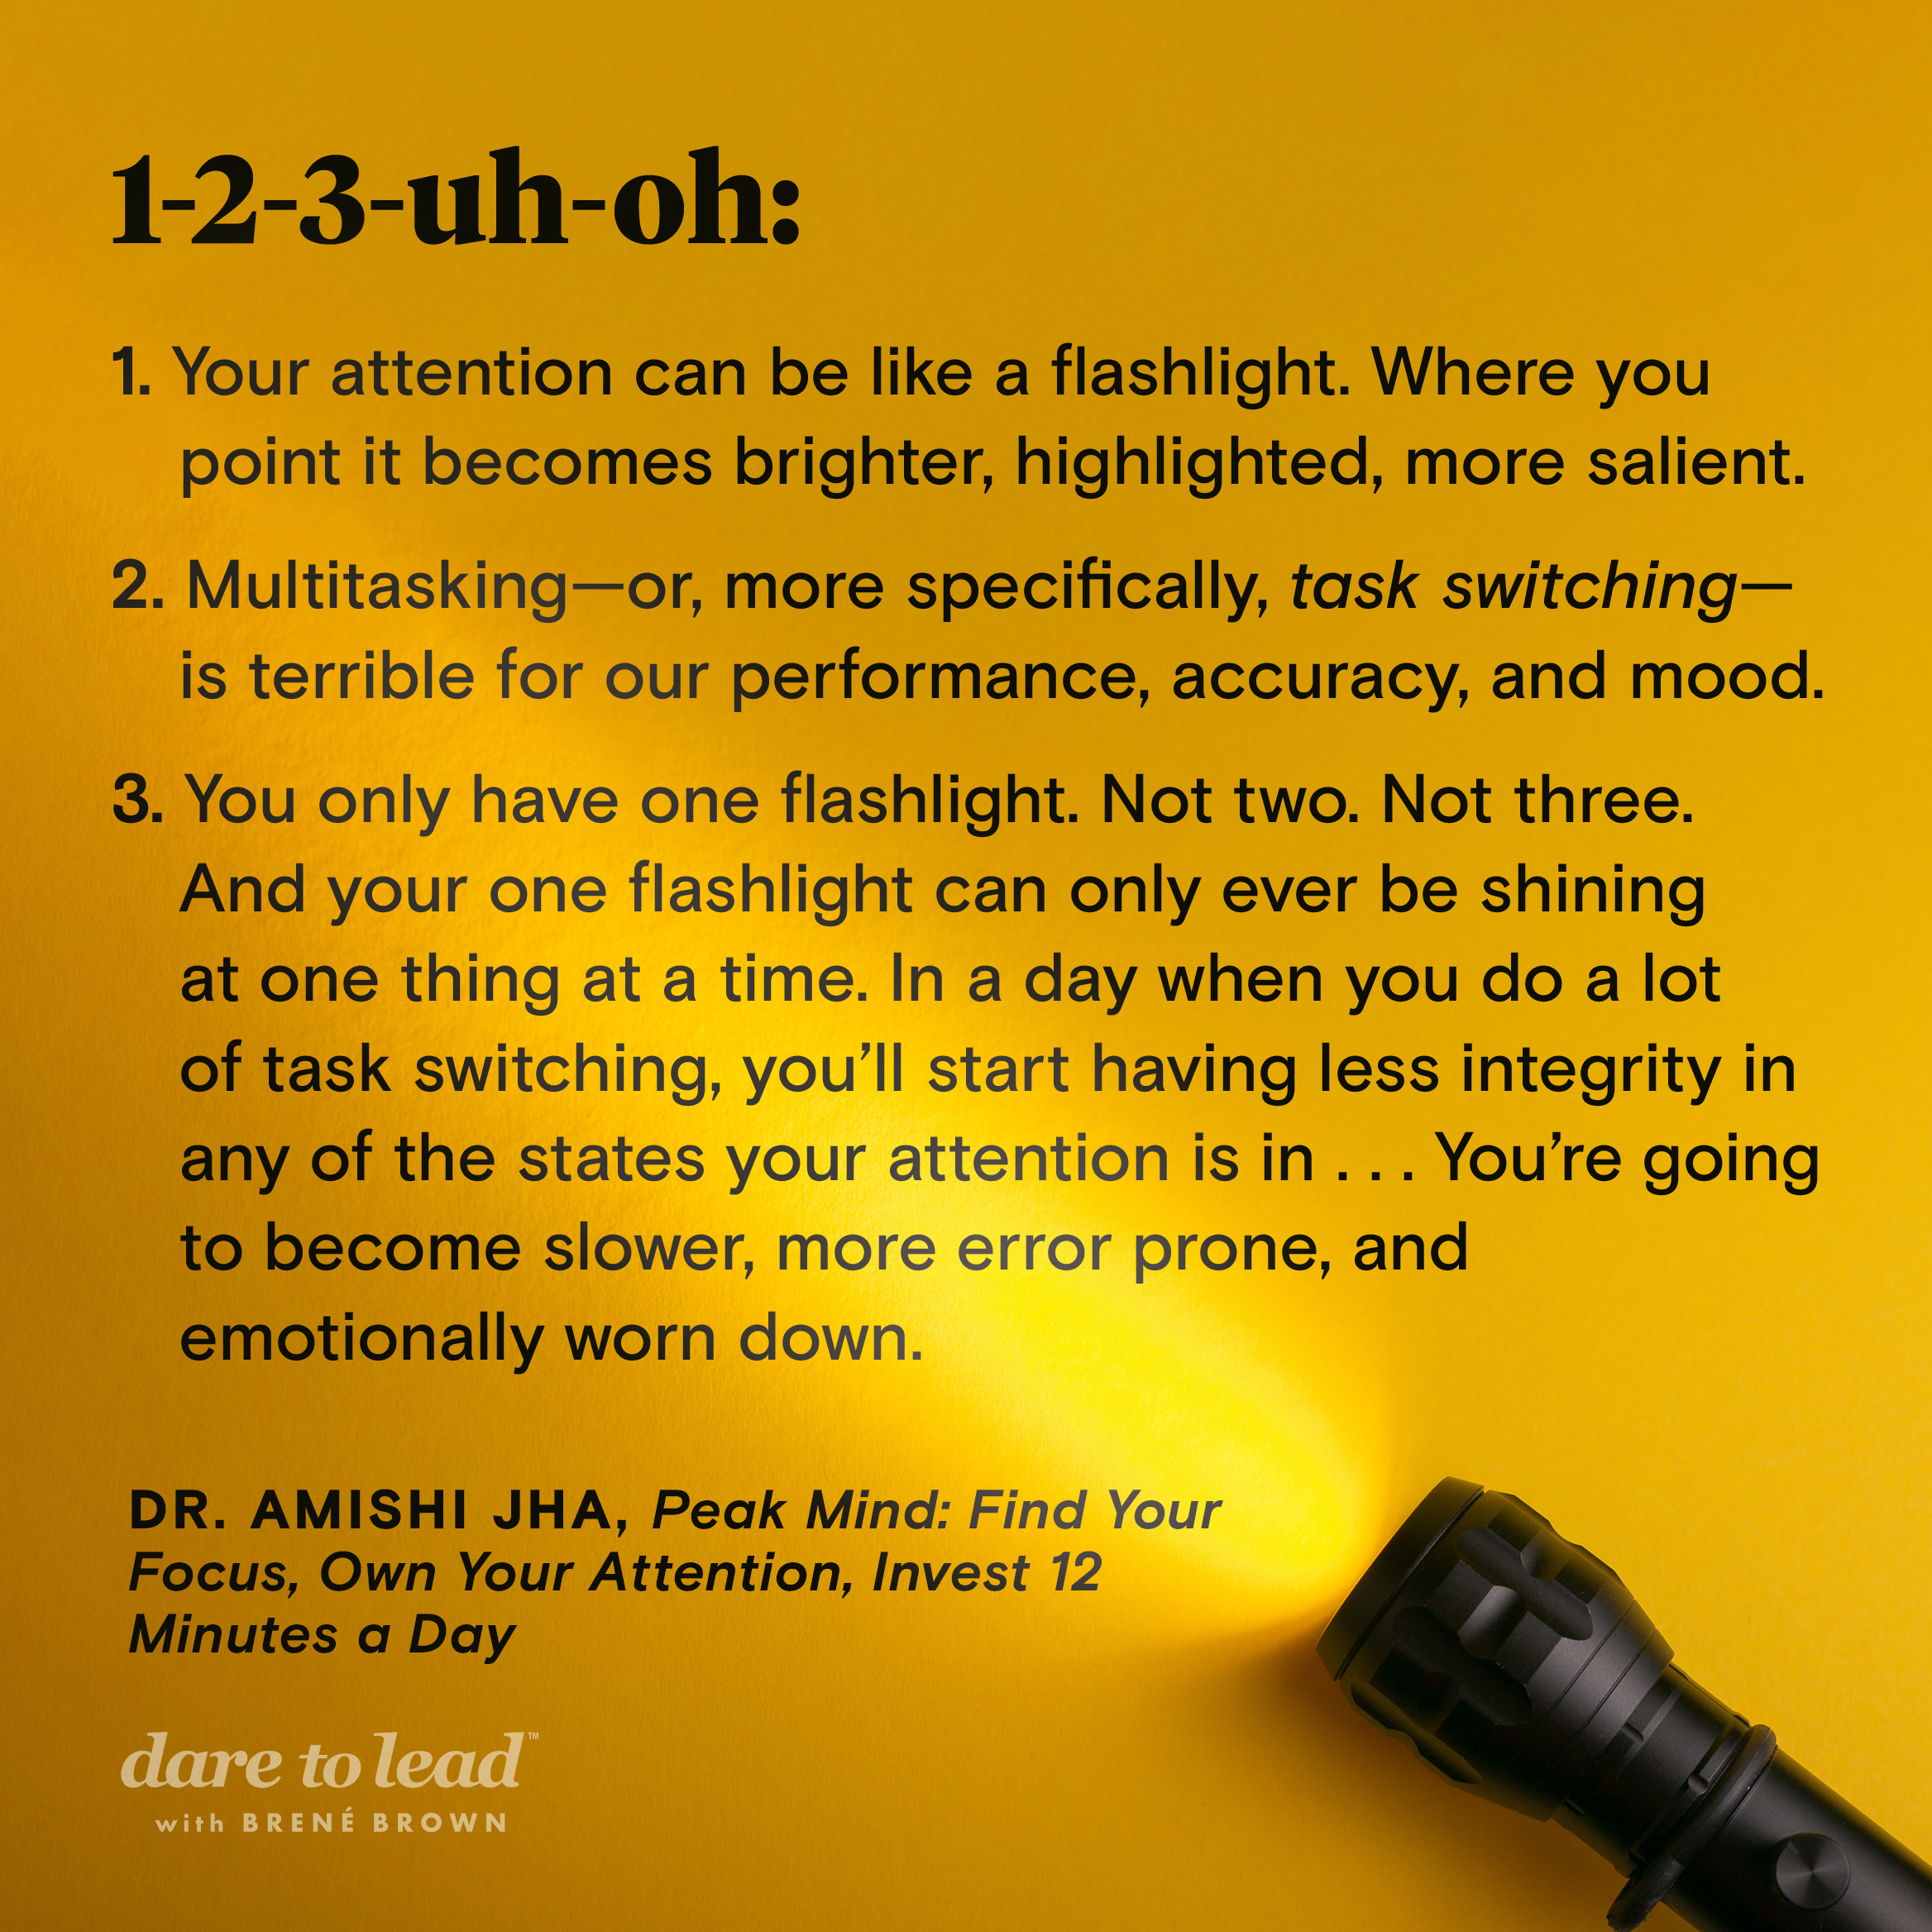 Takeaways from Peak Mind: Find Your Focus, Own Your Attention, Invest 12 Minutes a Day, by Dr. Amishi Jha: (1) Your attention can be like a flashlight. Where you point it becomes brighter, highlighted, more salient. (2) Multitasking—or, more specifically, task switching—is terrible for our performance, accuracy, and mood. (3) You only have one flashlight. Not two. Not three. And your one flashlight can only ever be shining at one thing at a time. In a day when you do a lot of task switching, you’ll start having less integrity in any of the states your attention is in . . . You’re going to become slower, more error prone, and emotionally worn down.